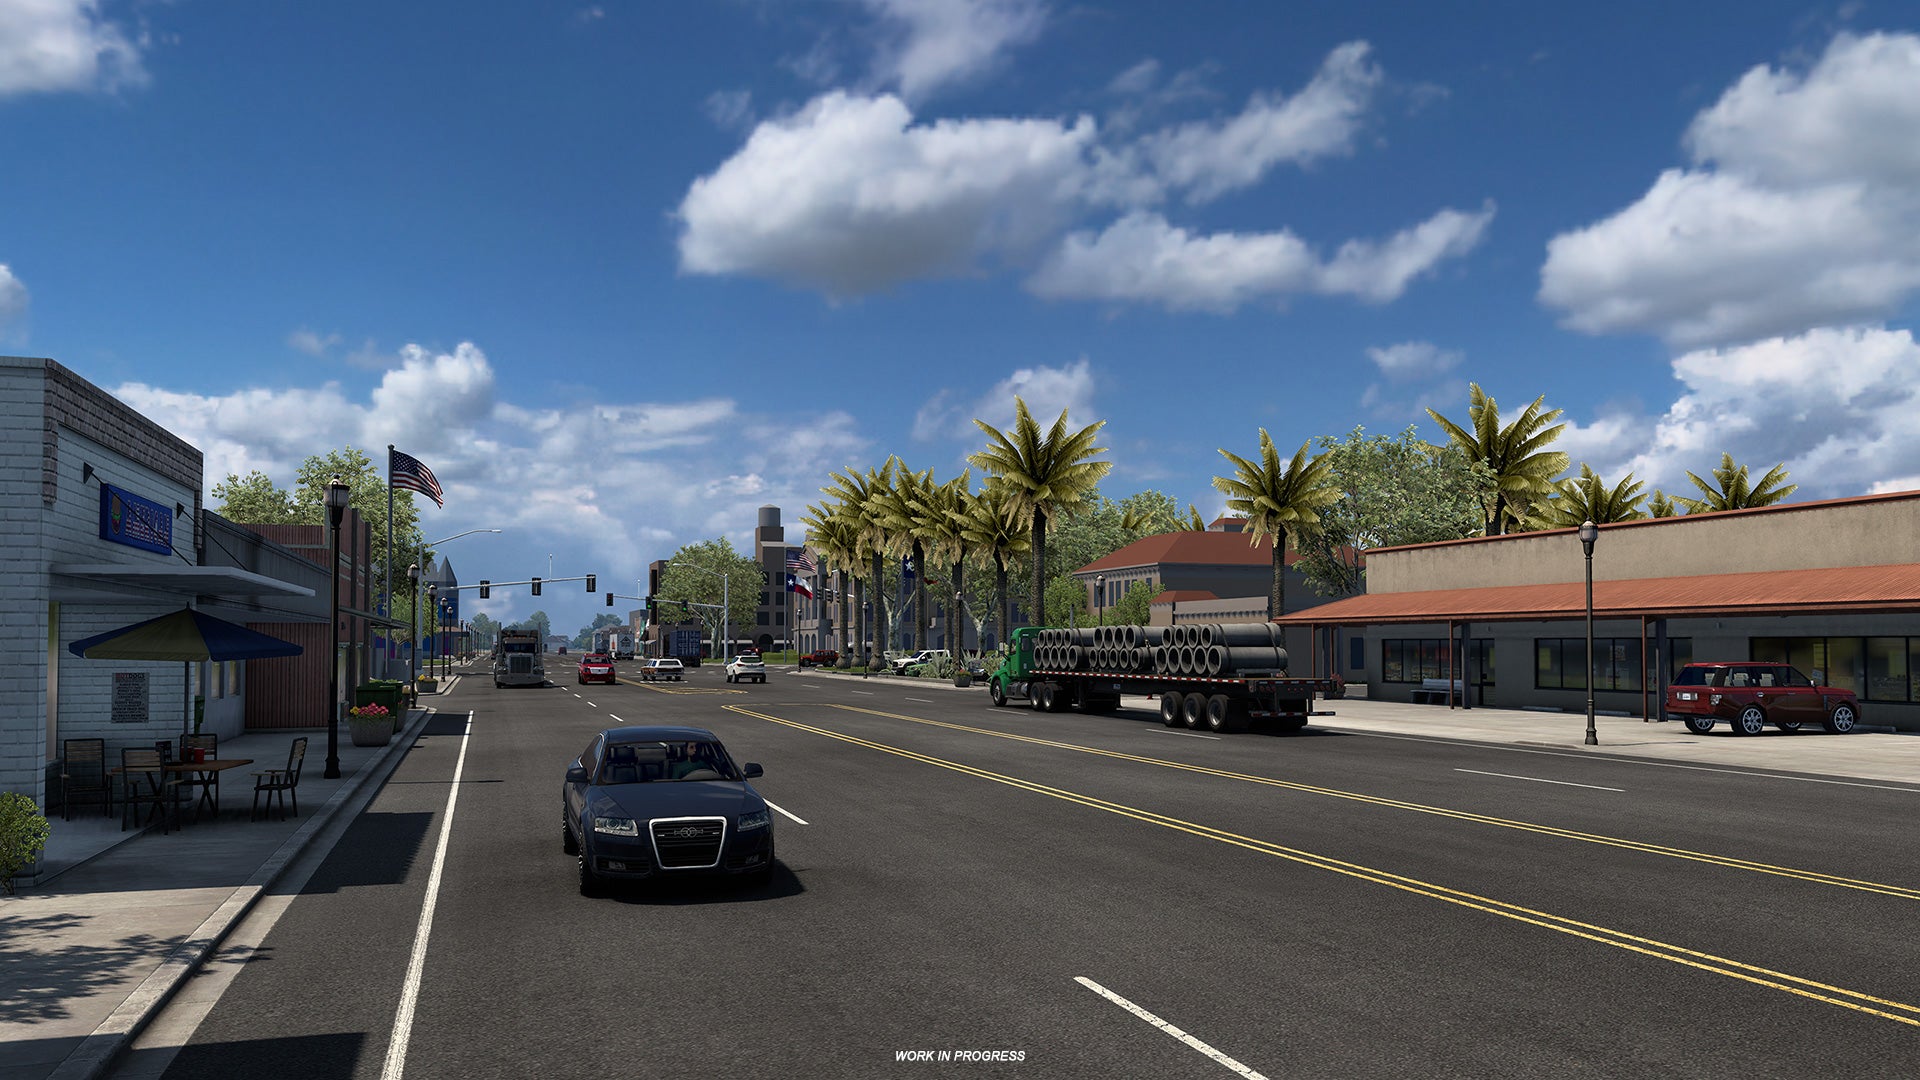 American Truck Simulator Texas - A five lane road with cars and trucks passes through a commercial area with palm trees.